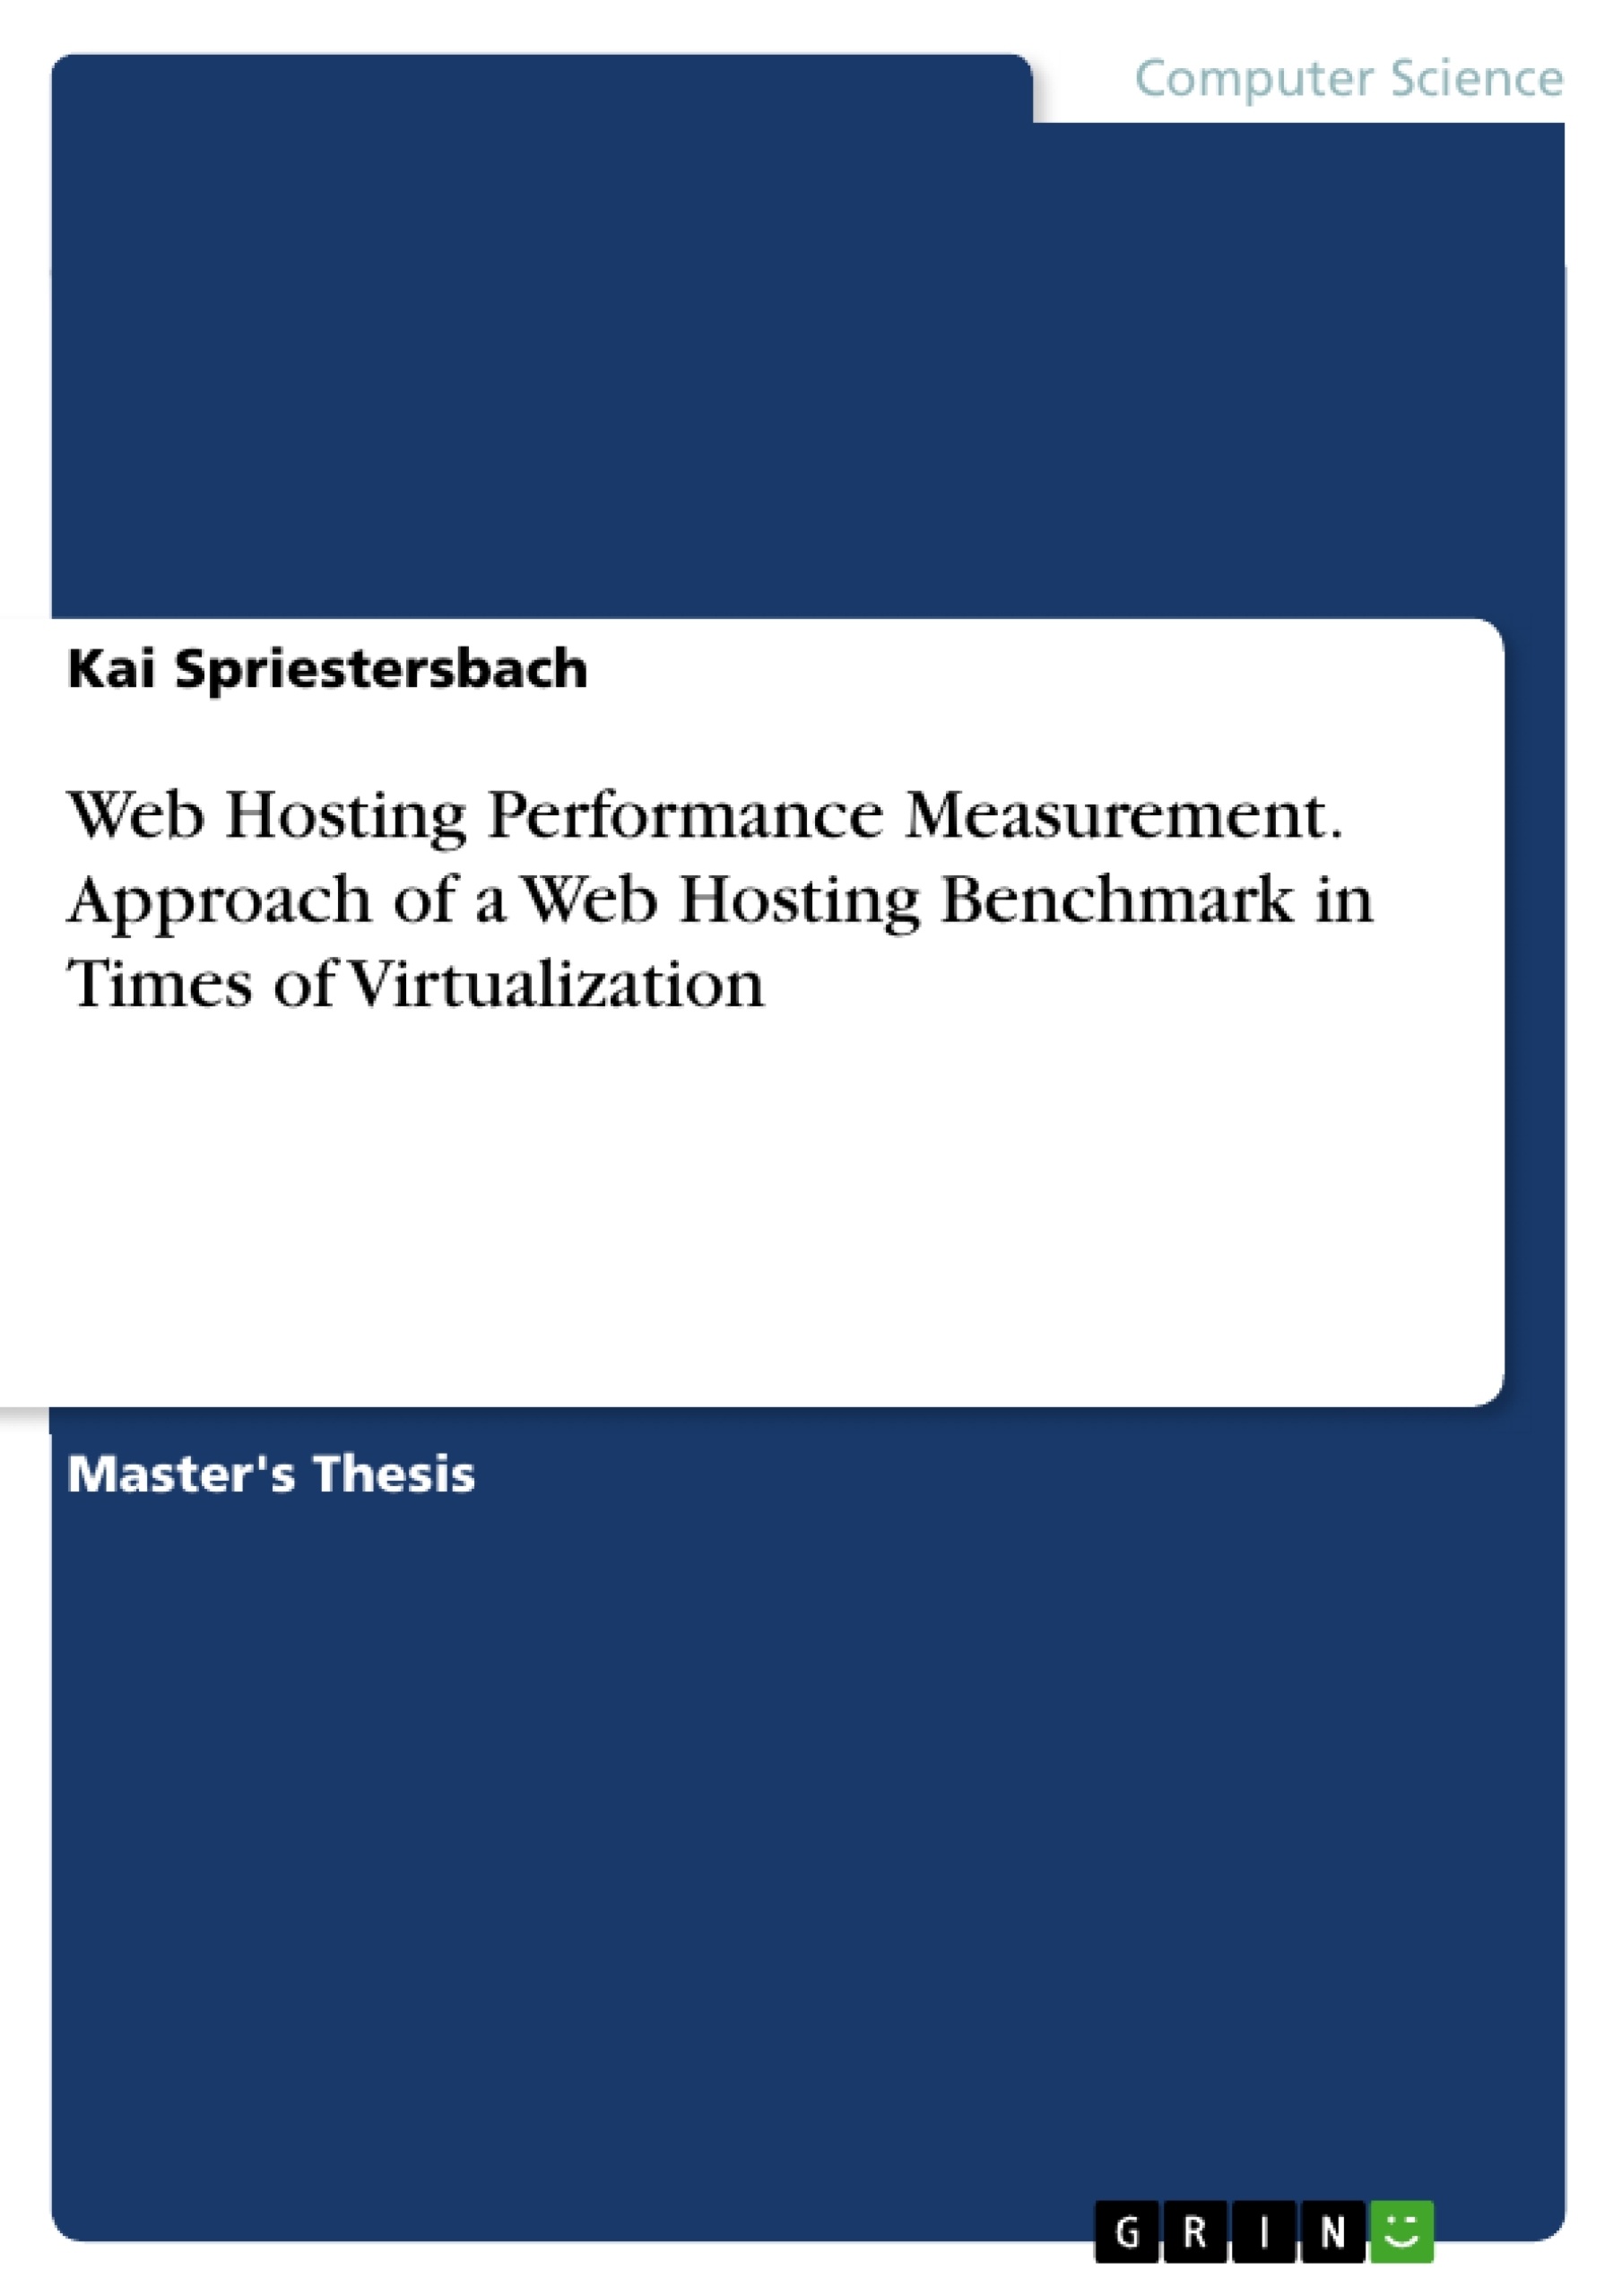 Title: Web Hosting Performance Measurement. Approach of a Web Hosting Benchmark in Times of Virtualization